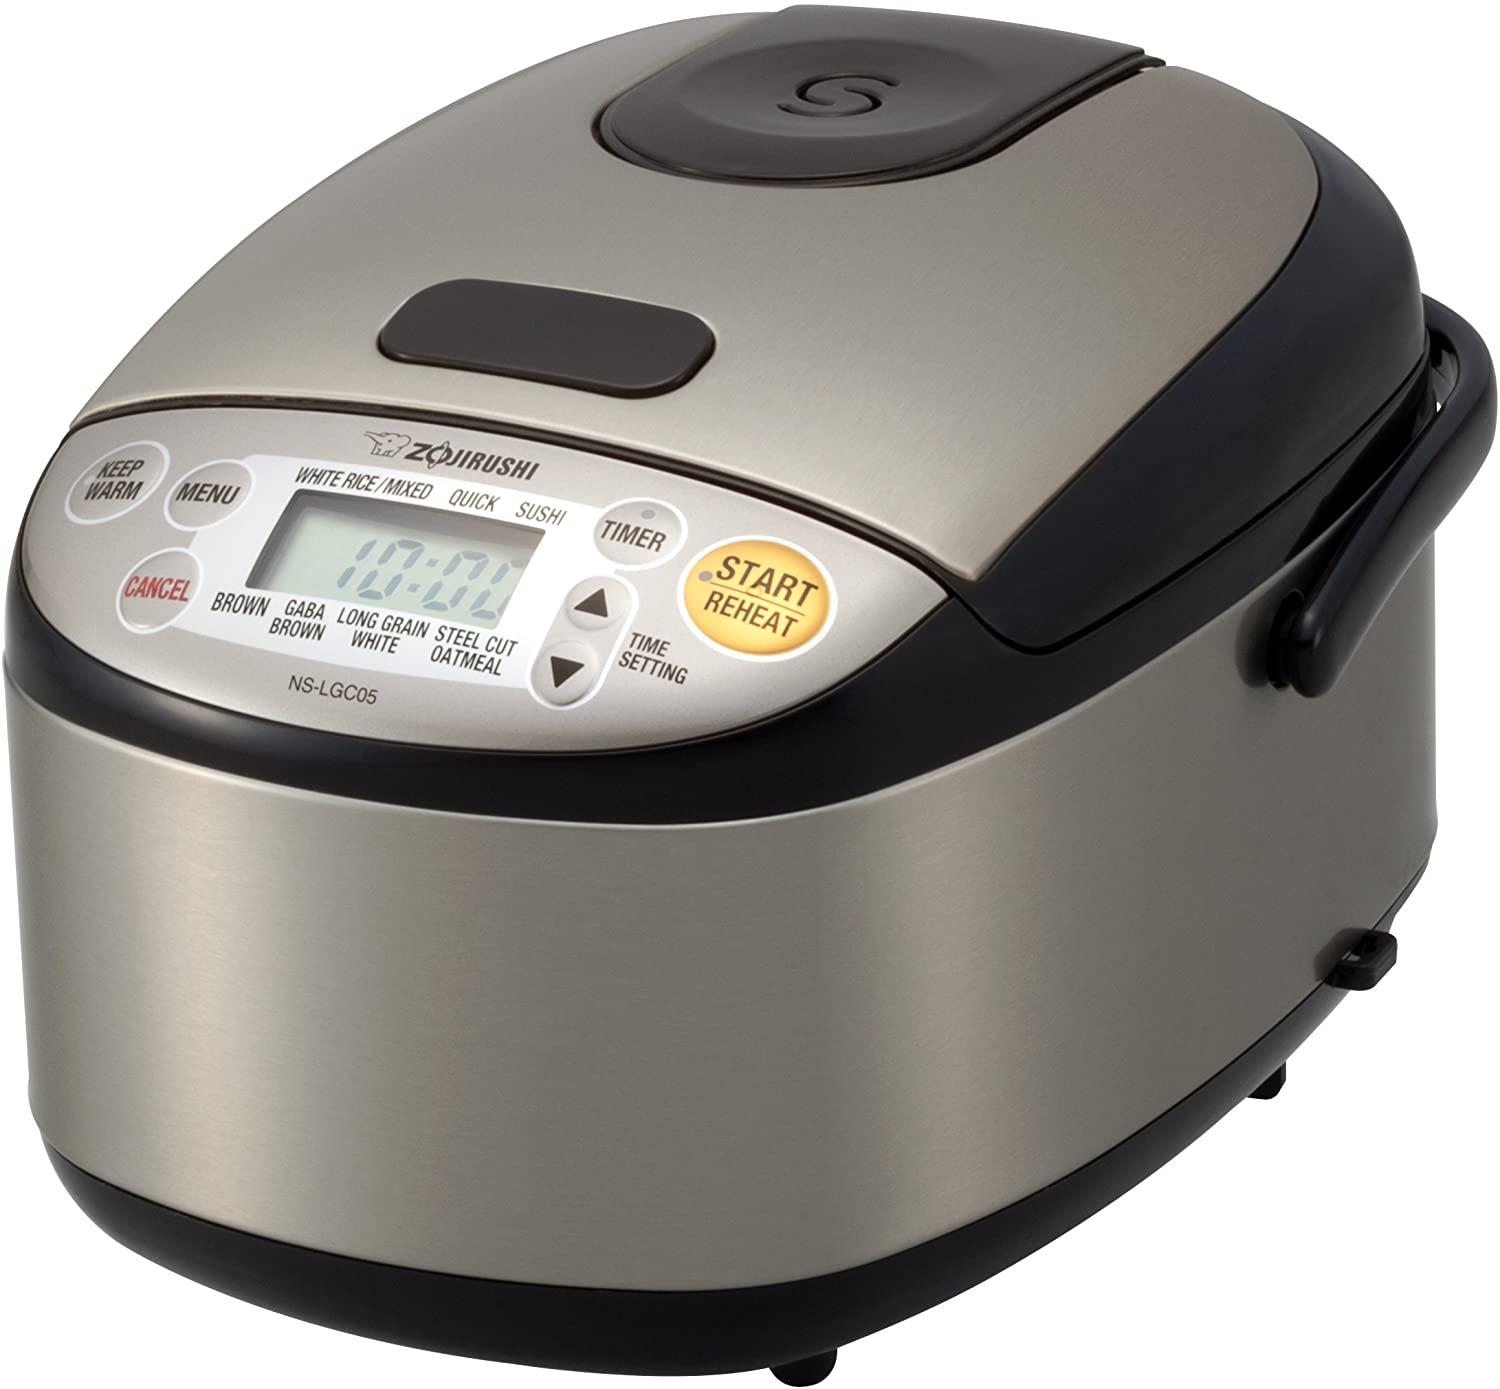 Zojirushi Micom Rice Cooker and Warmer for $104.99 Shipped